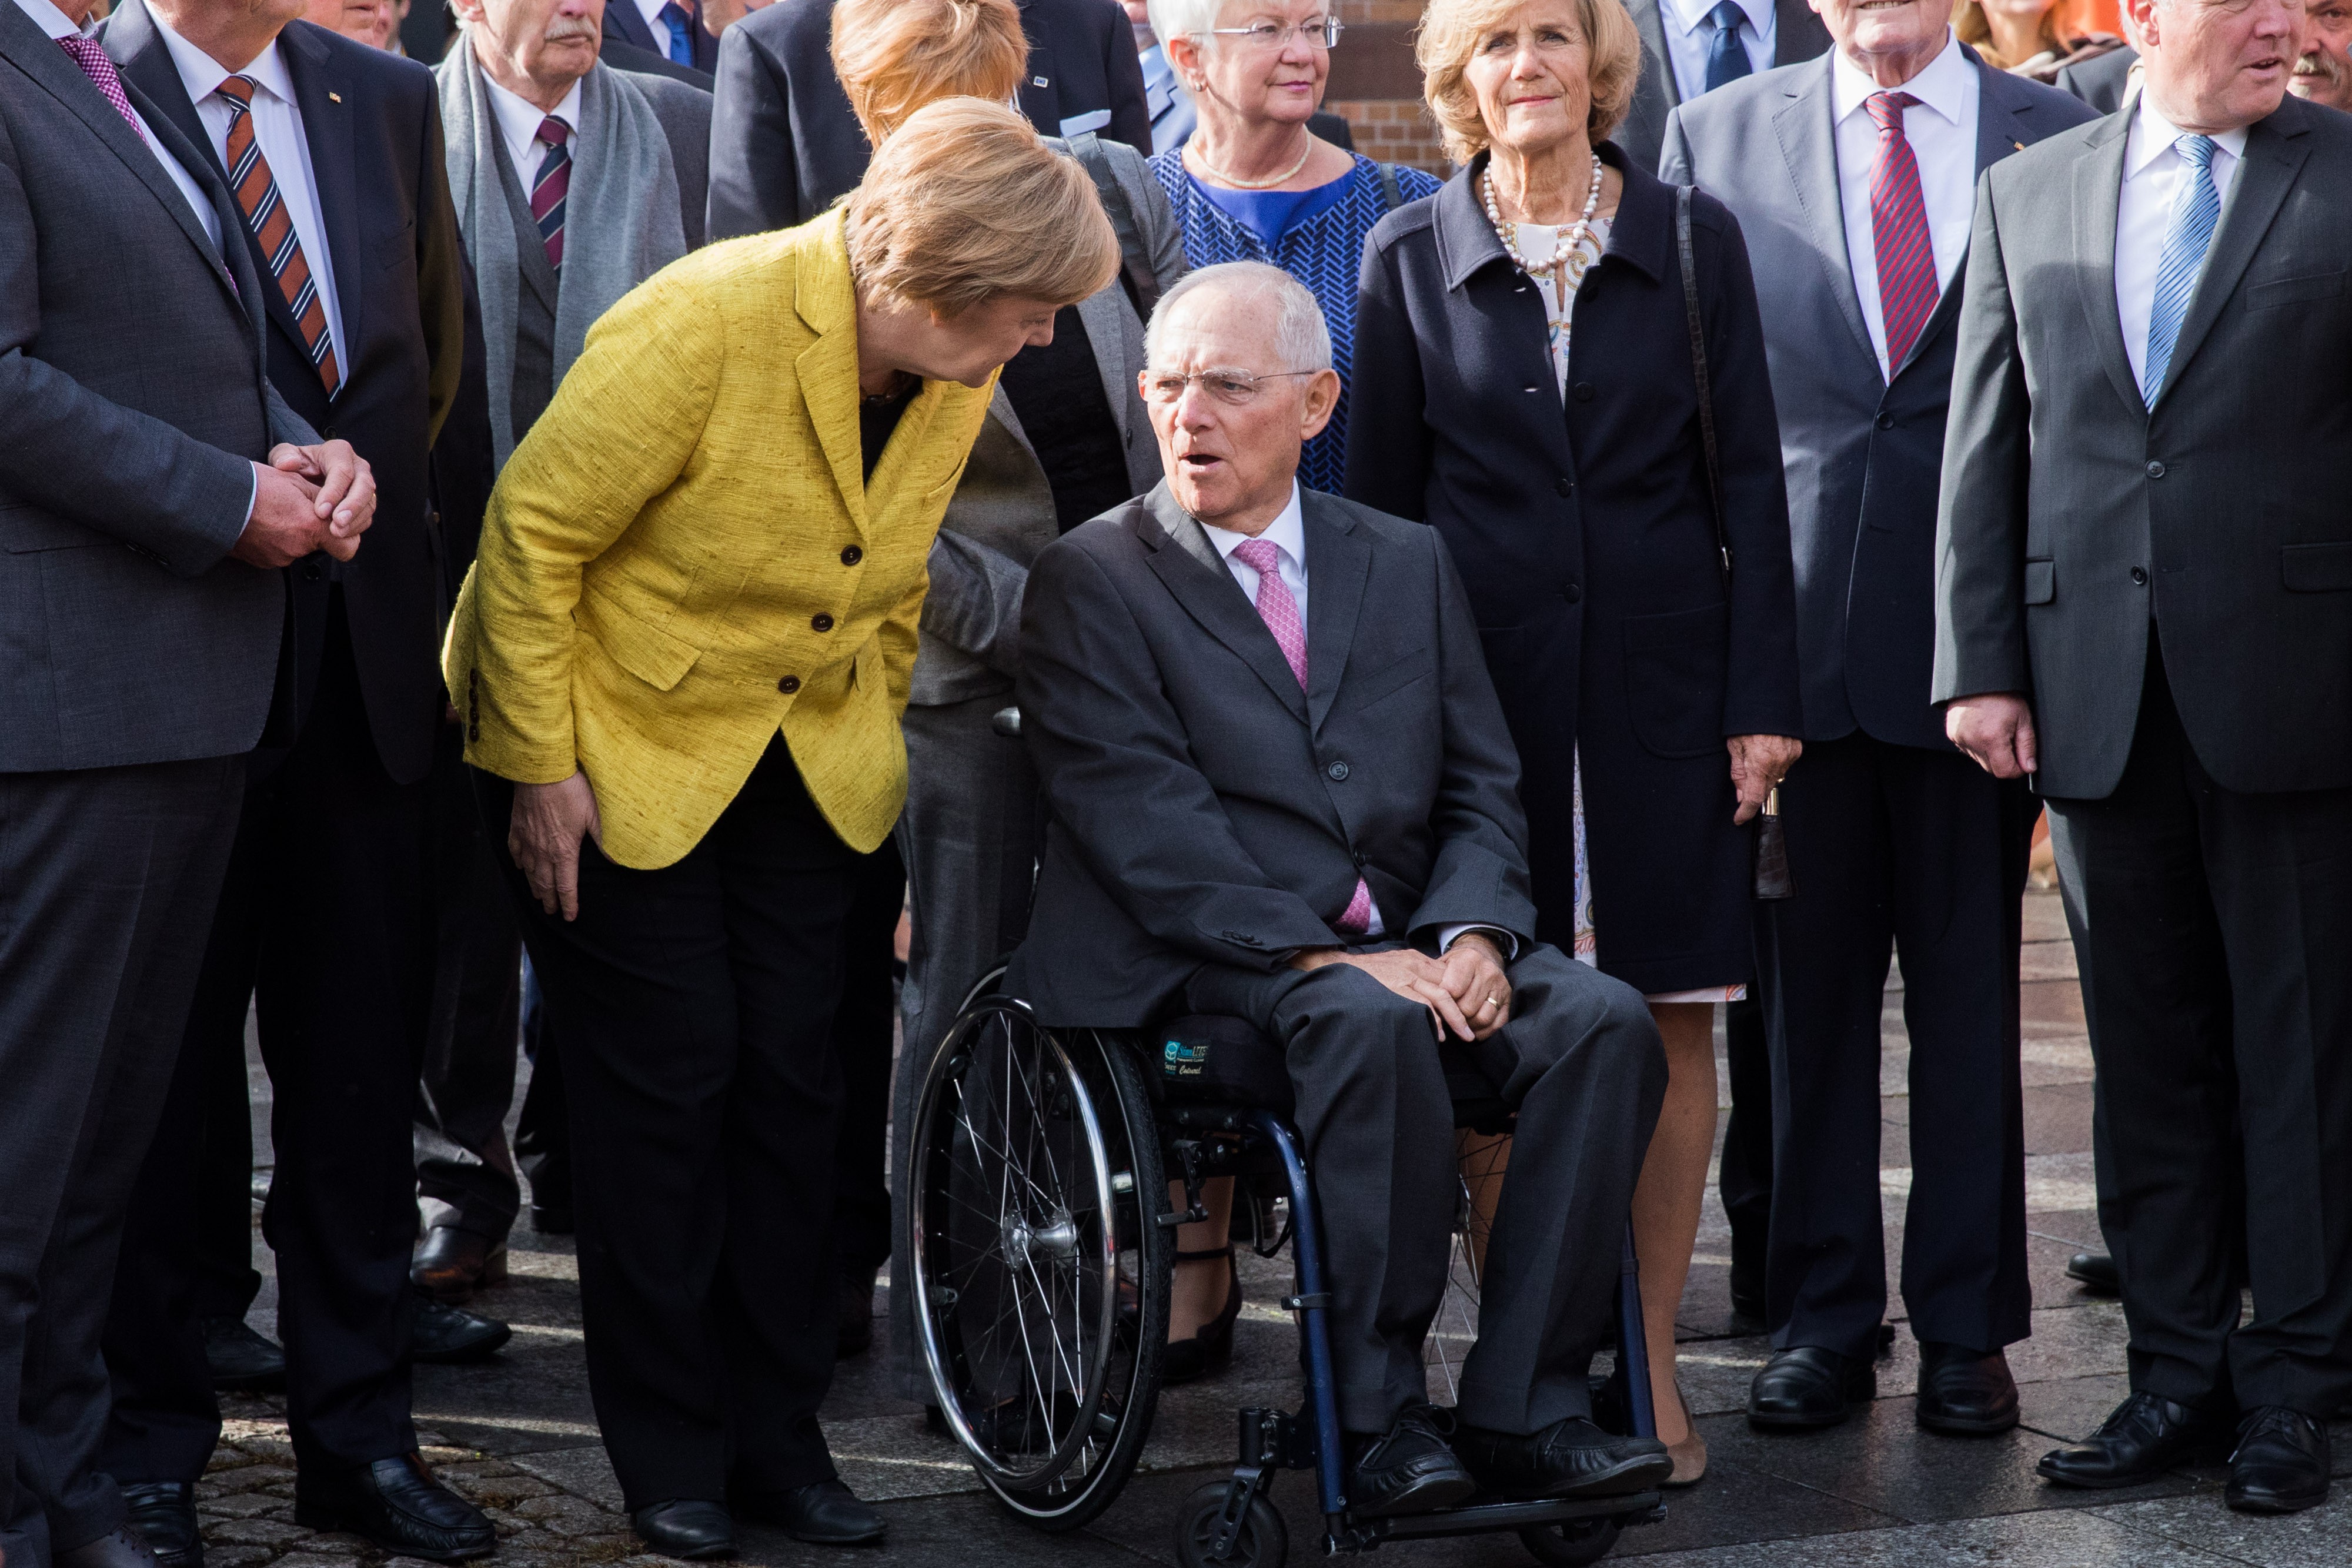 A close ally of German Chancellor Merkel, it was she who pulled Athens from the precipice, playing good cop to Schaeuble’s bad one in what had become a regular routine by Germany throughout the debt crisis. Photo: Bloomberg